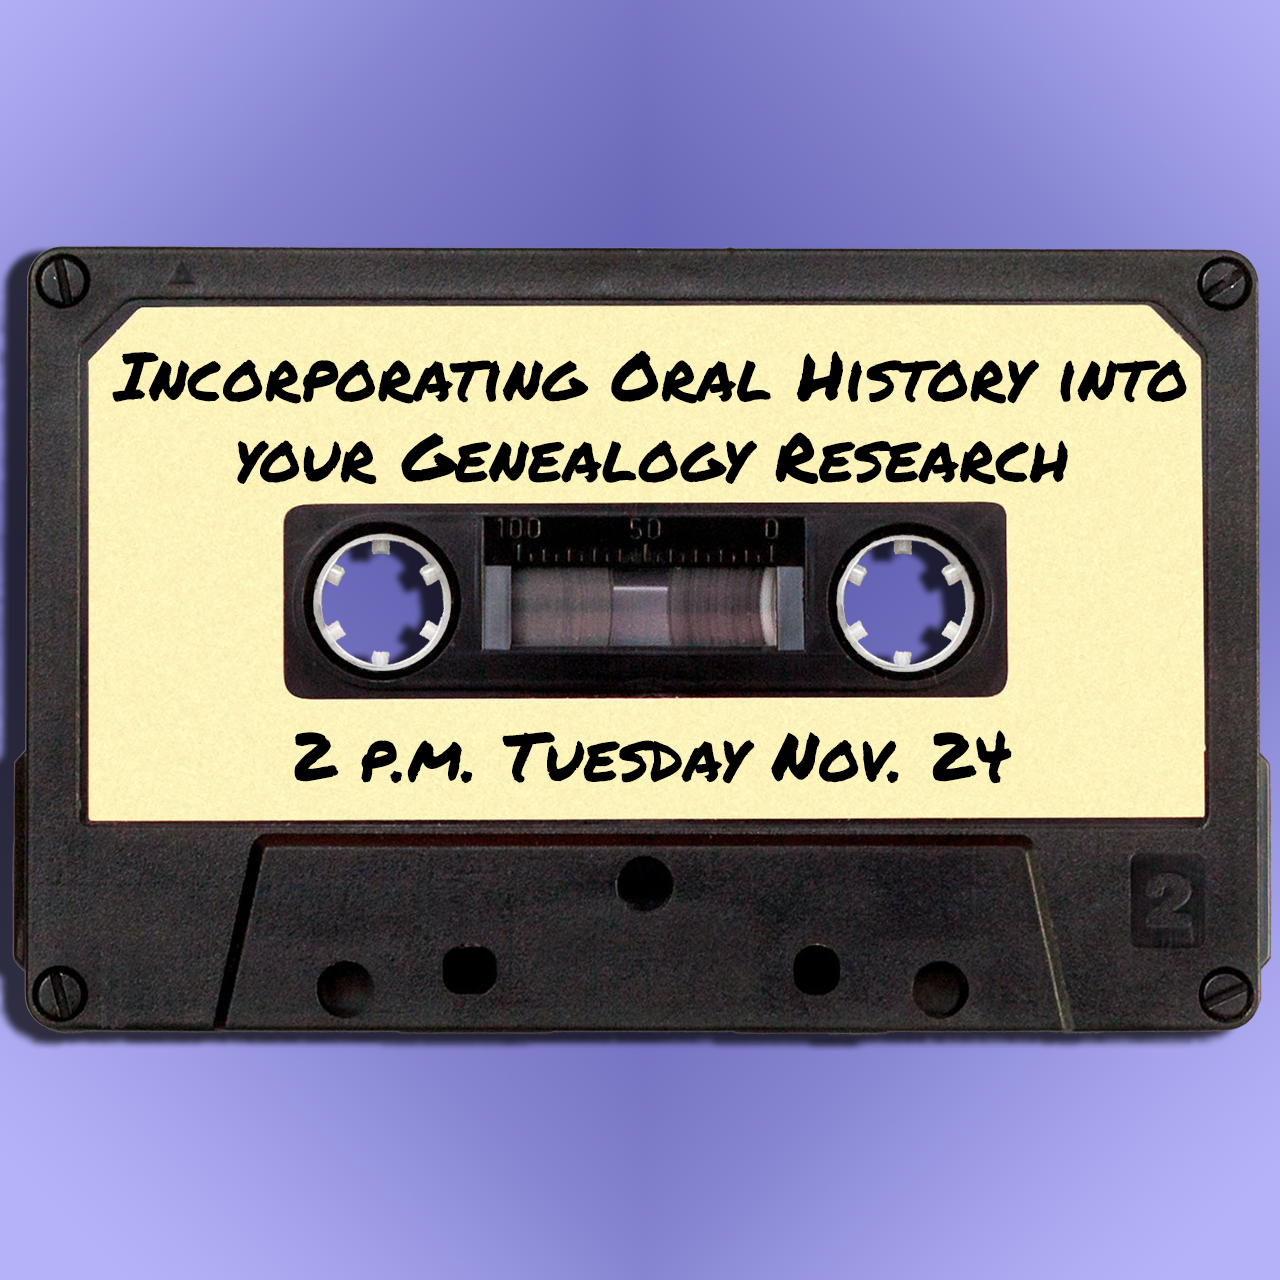 Incorporating Oral History into your Genealogy Research